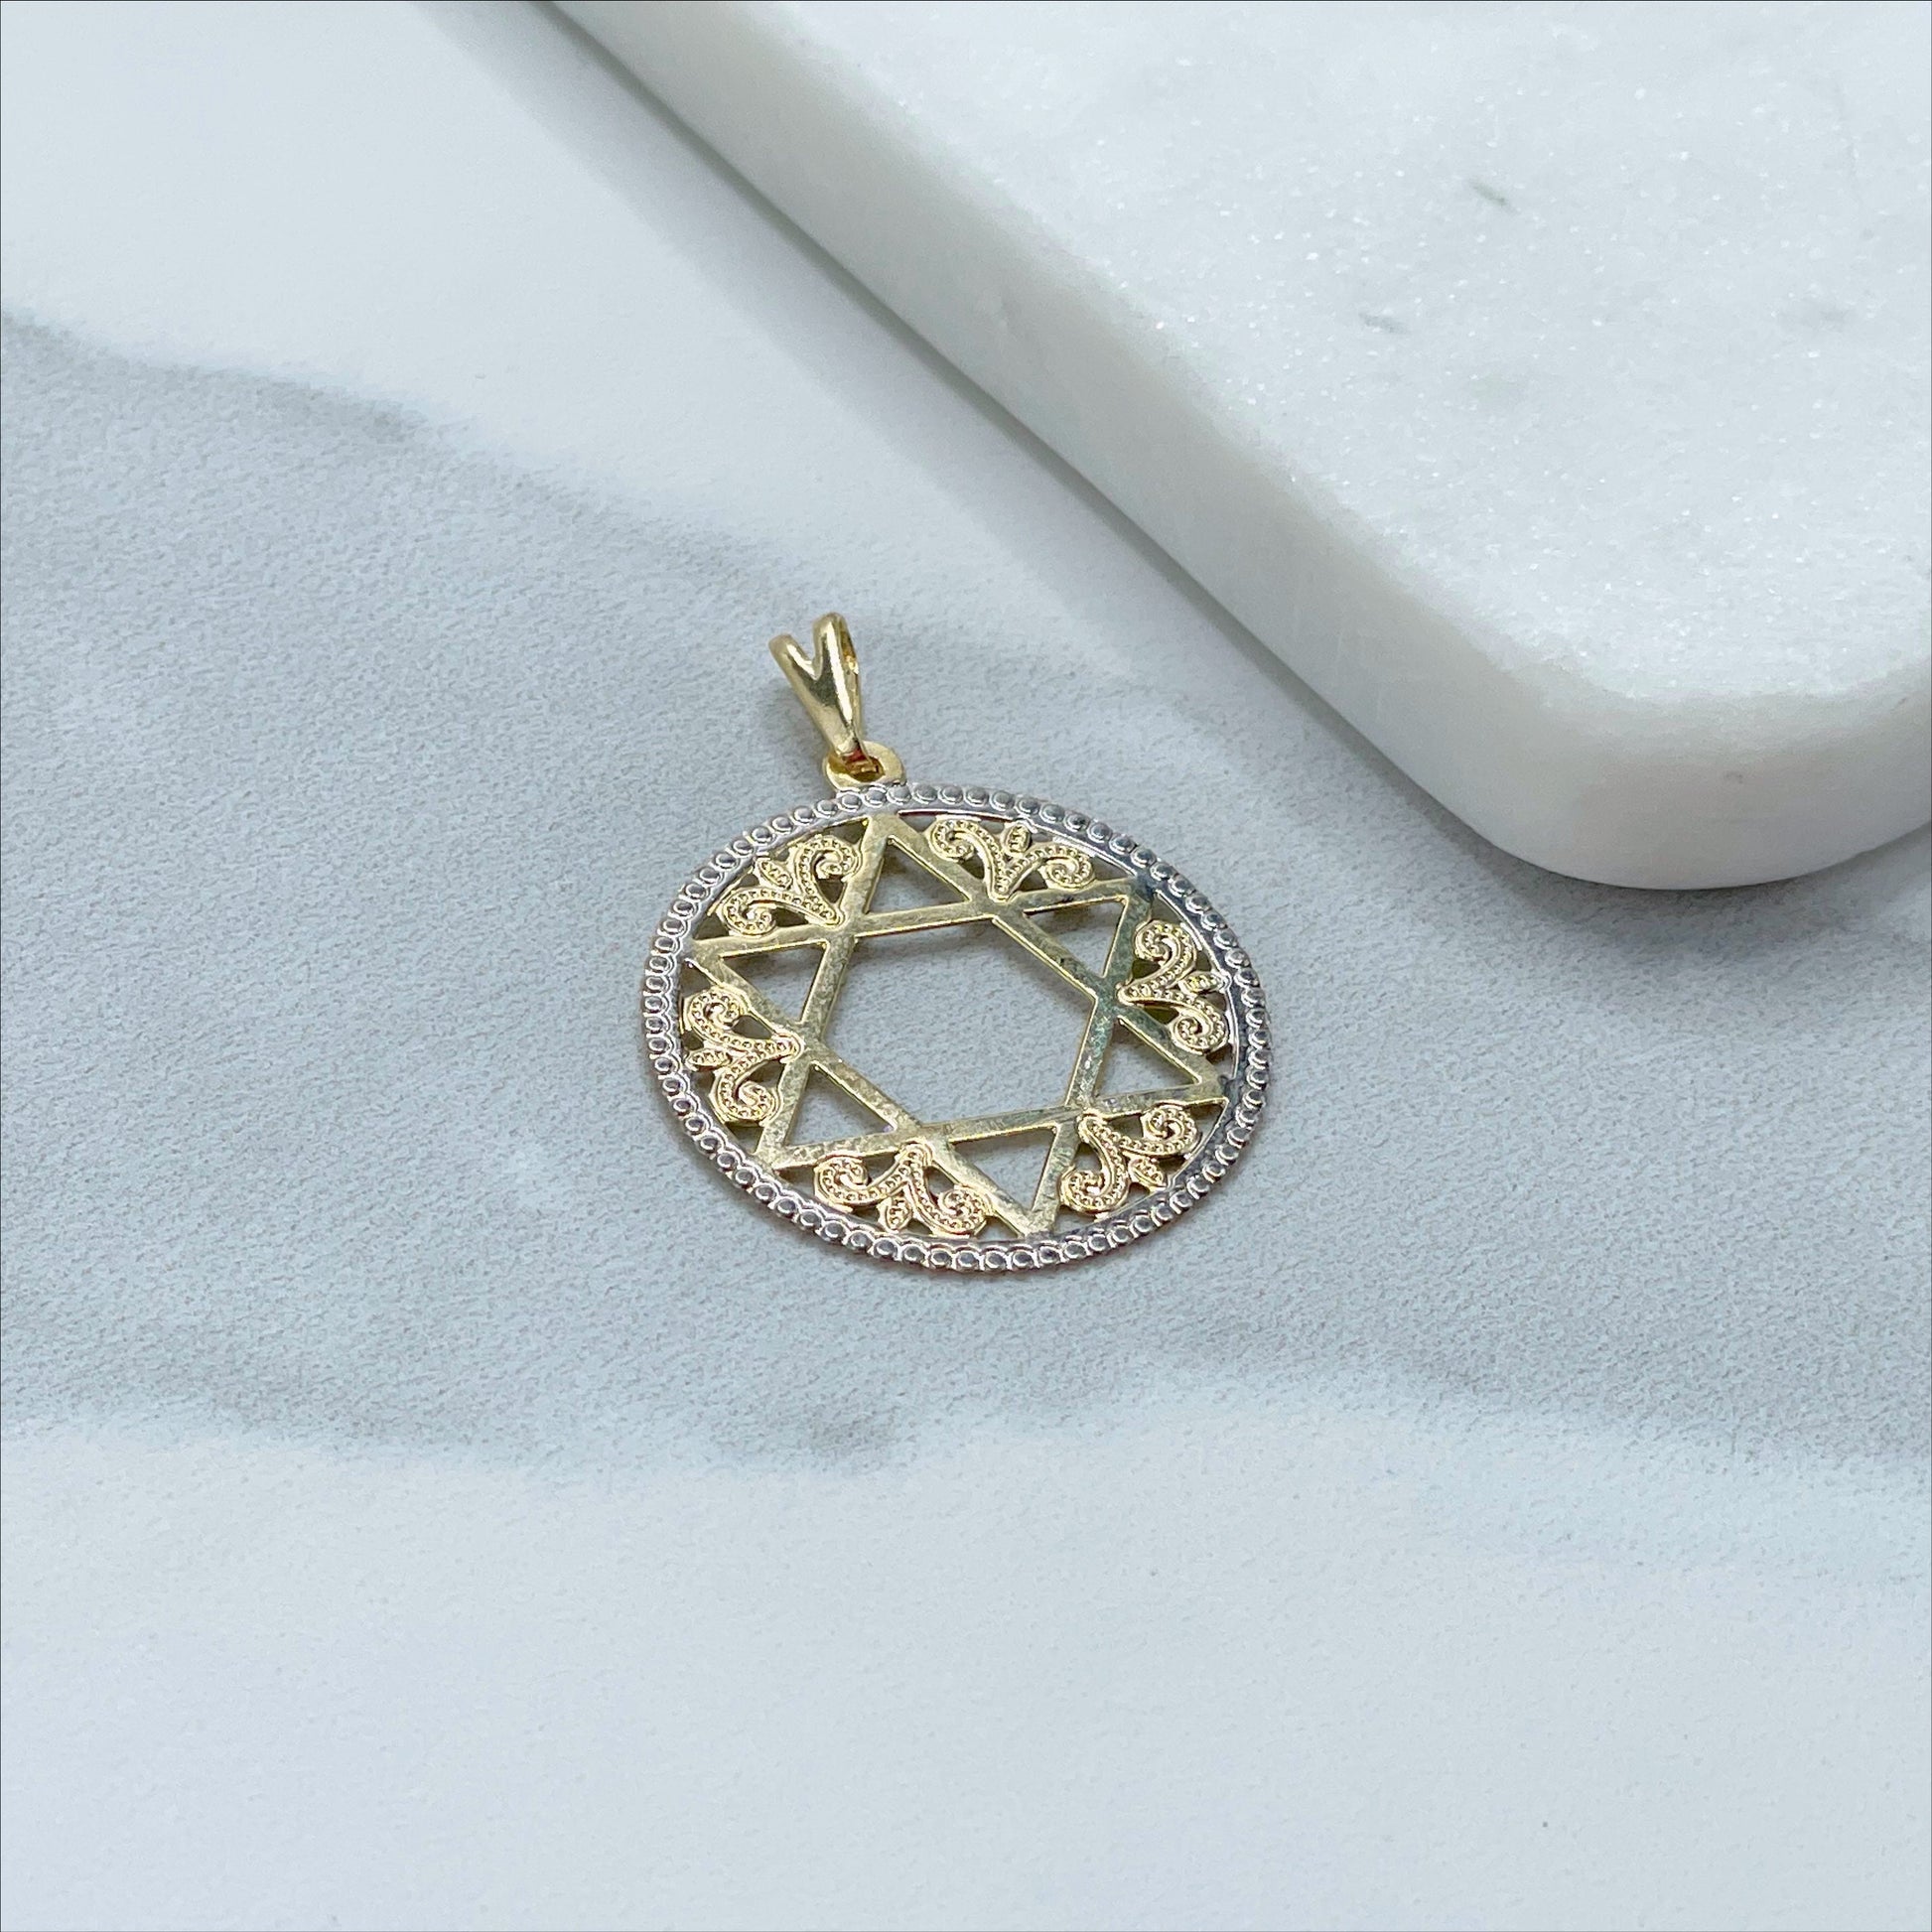 18k Gold Filled with White Gold Filled Texturized Star of David Charms Pendant, Jewish Symbol, Wholesale Jewelry Making Supplies